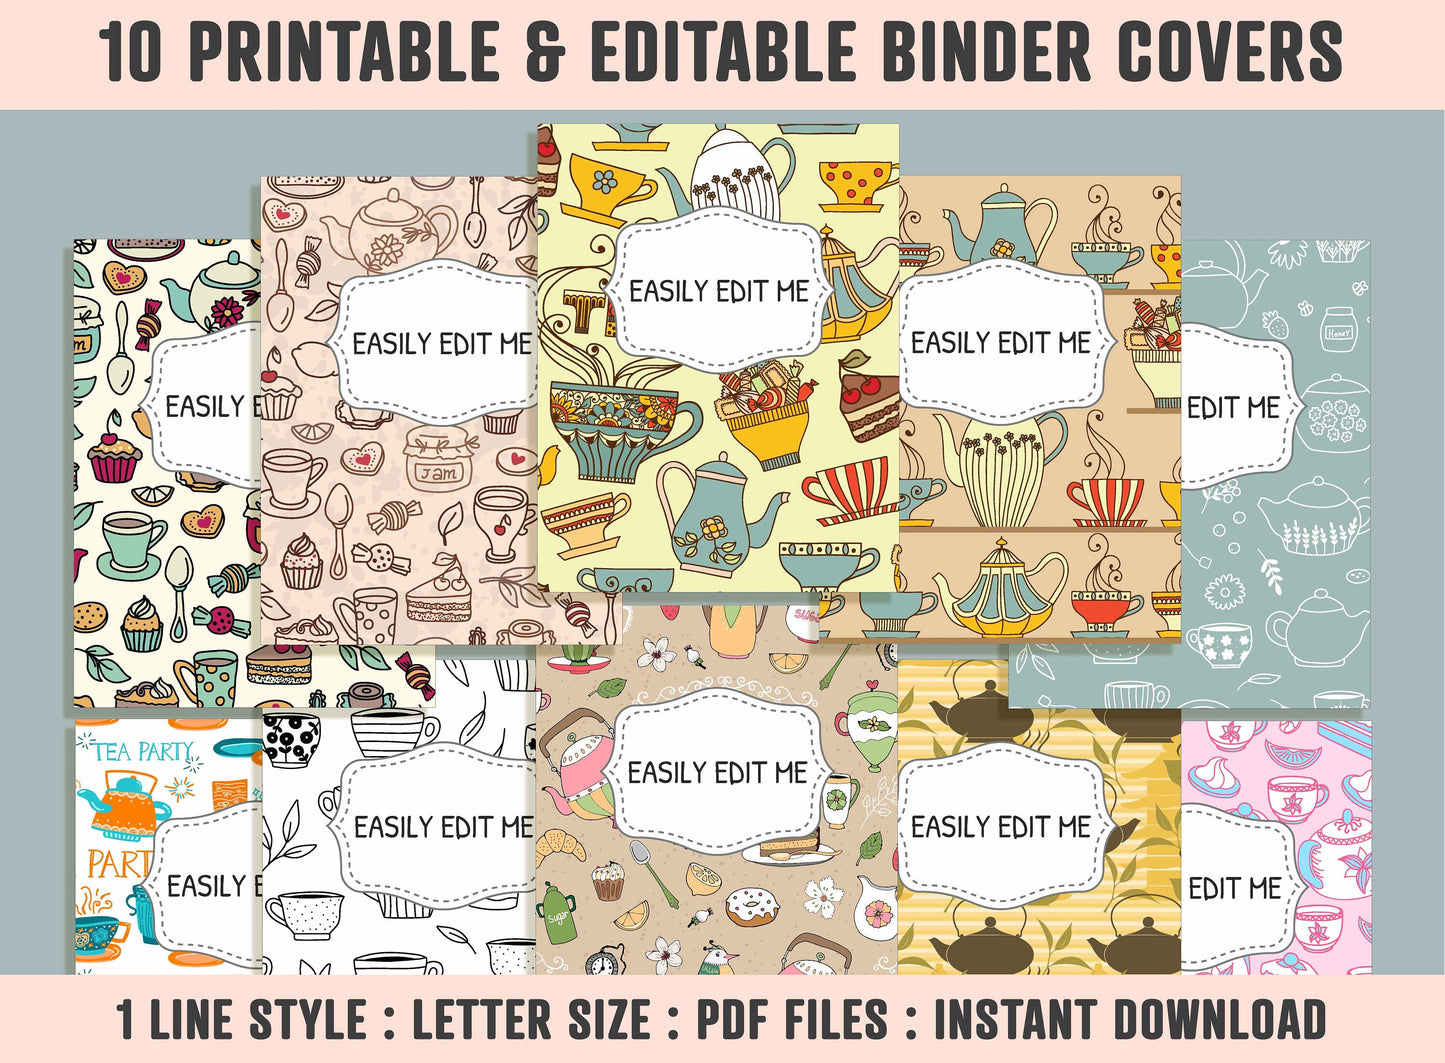 Cups and Teapots Binder Cover, 10 Printable & Editable Binder Covers + Spines, Binder Inserts, Teacher/School Planner Cover Template